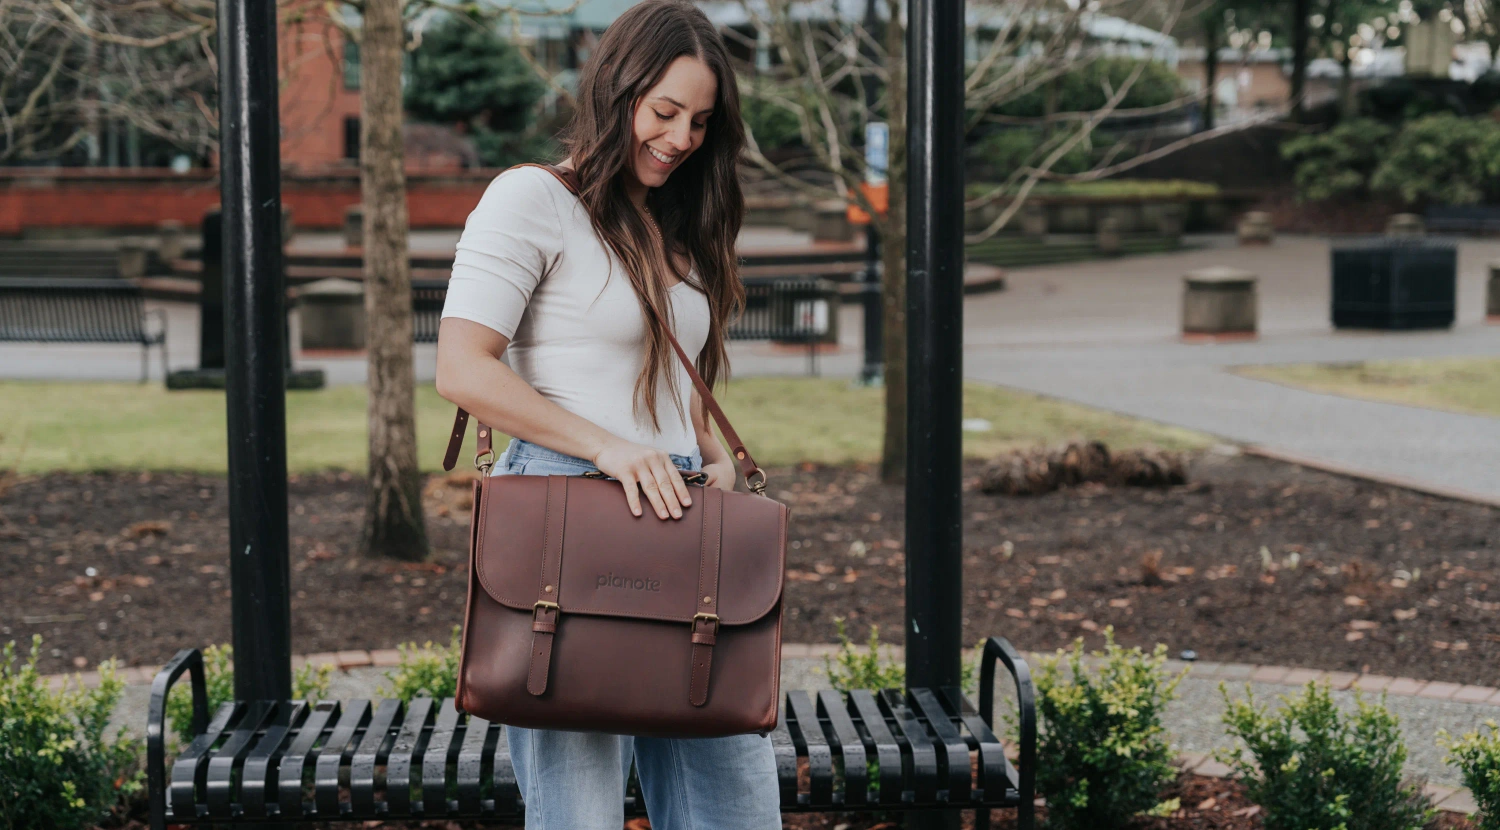 A woman carrying The Pianote BookBag, showcasing its fashionable and functional design.